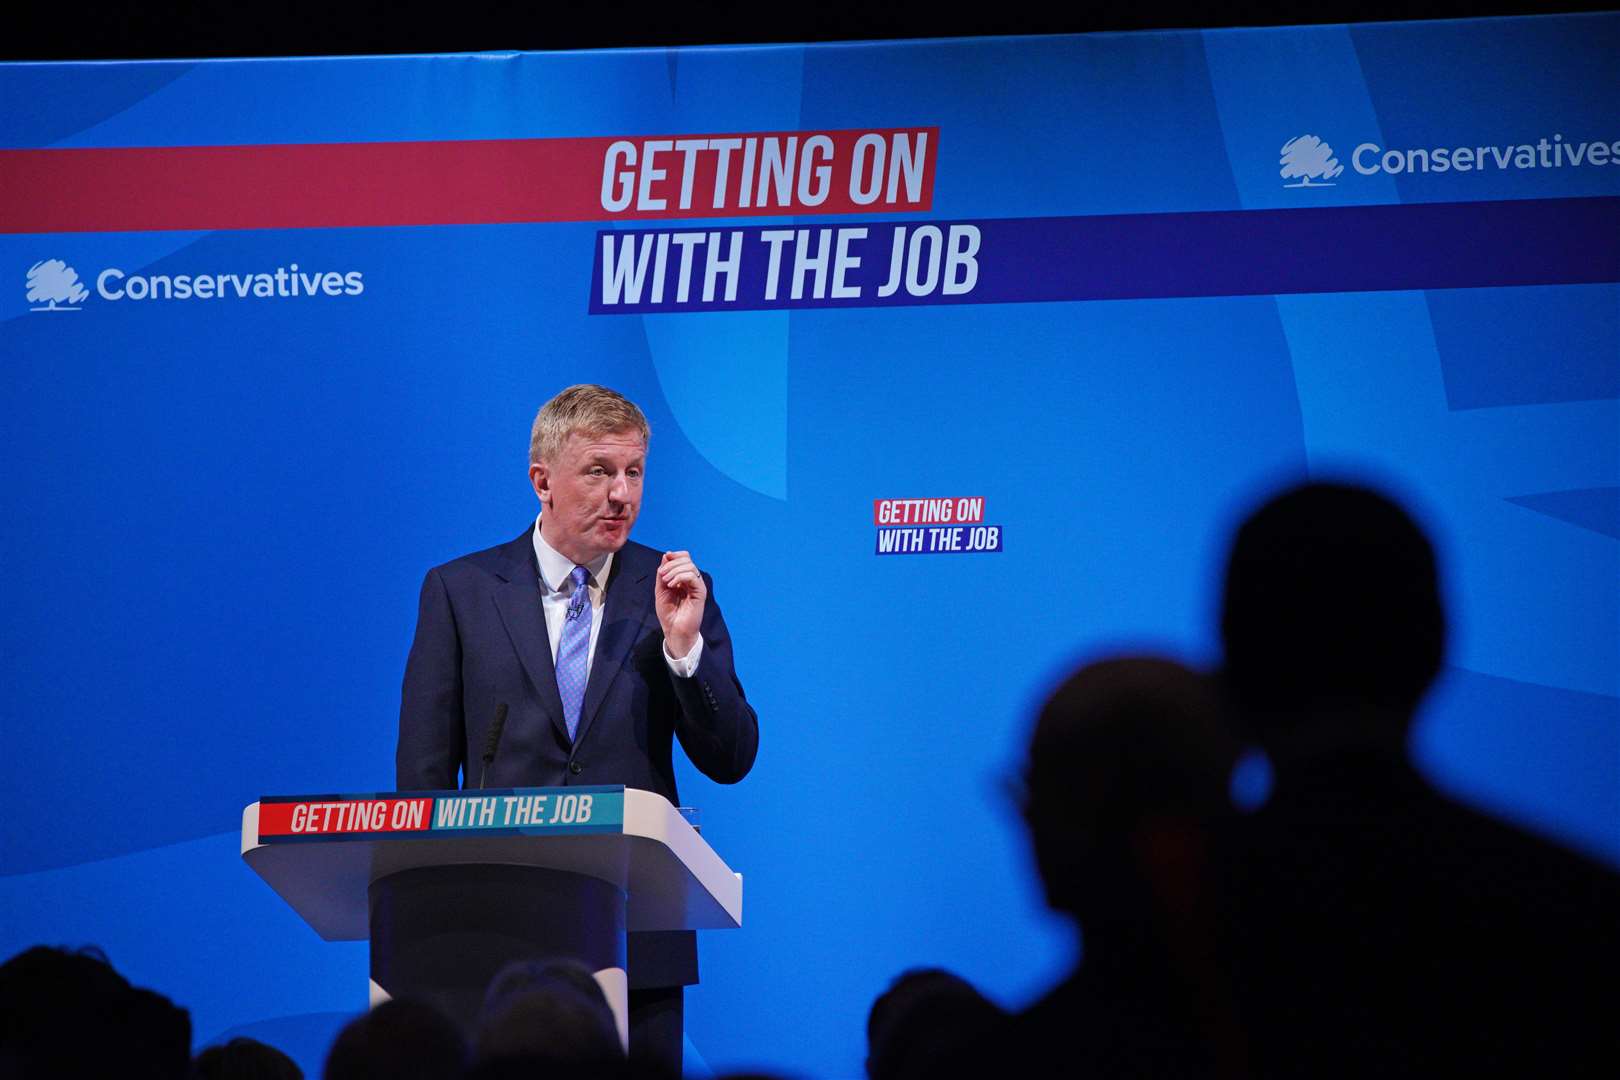 Conservative party chairman Oliver Dowden said he would not ‘dismiss’ any claims of wrongdoing (Peter Byrne/PA)